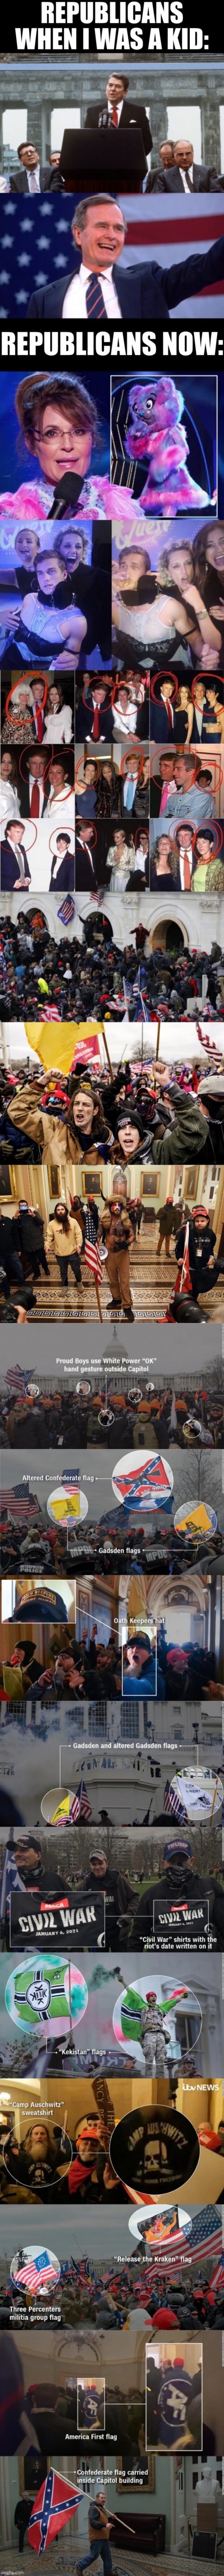 The Republican Party’s descent into the looney bin. | image tagged in republicans then vs now full,republicans,republican,jan 6,capitol hill,trump to gop | made w/ Imgflip meme maker